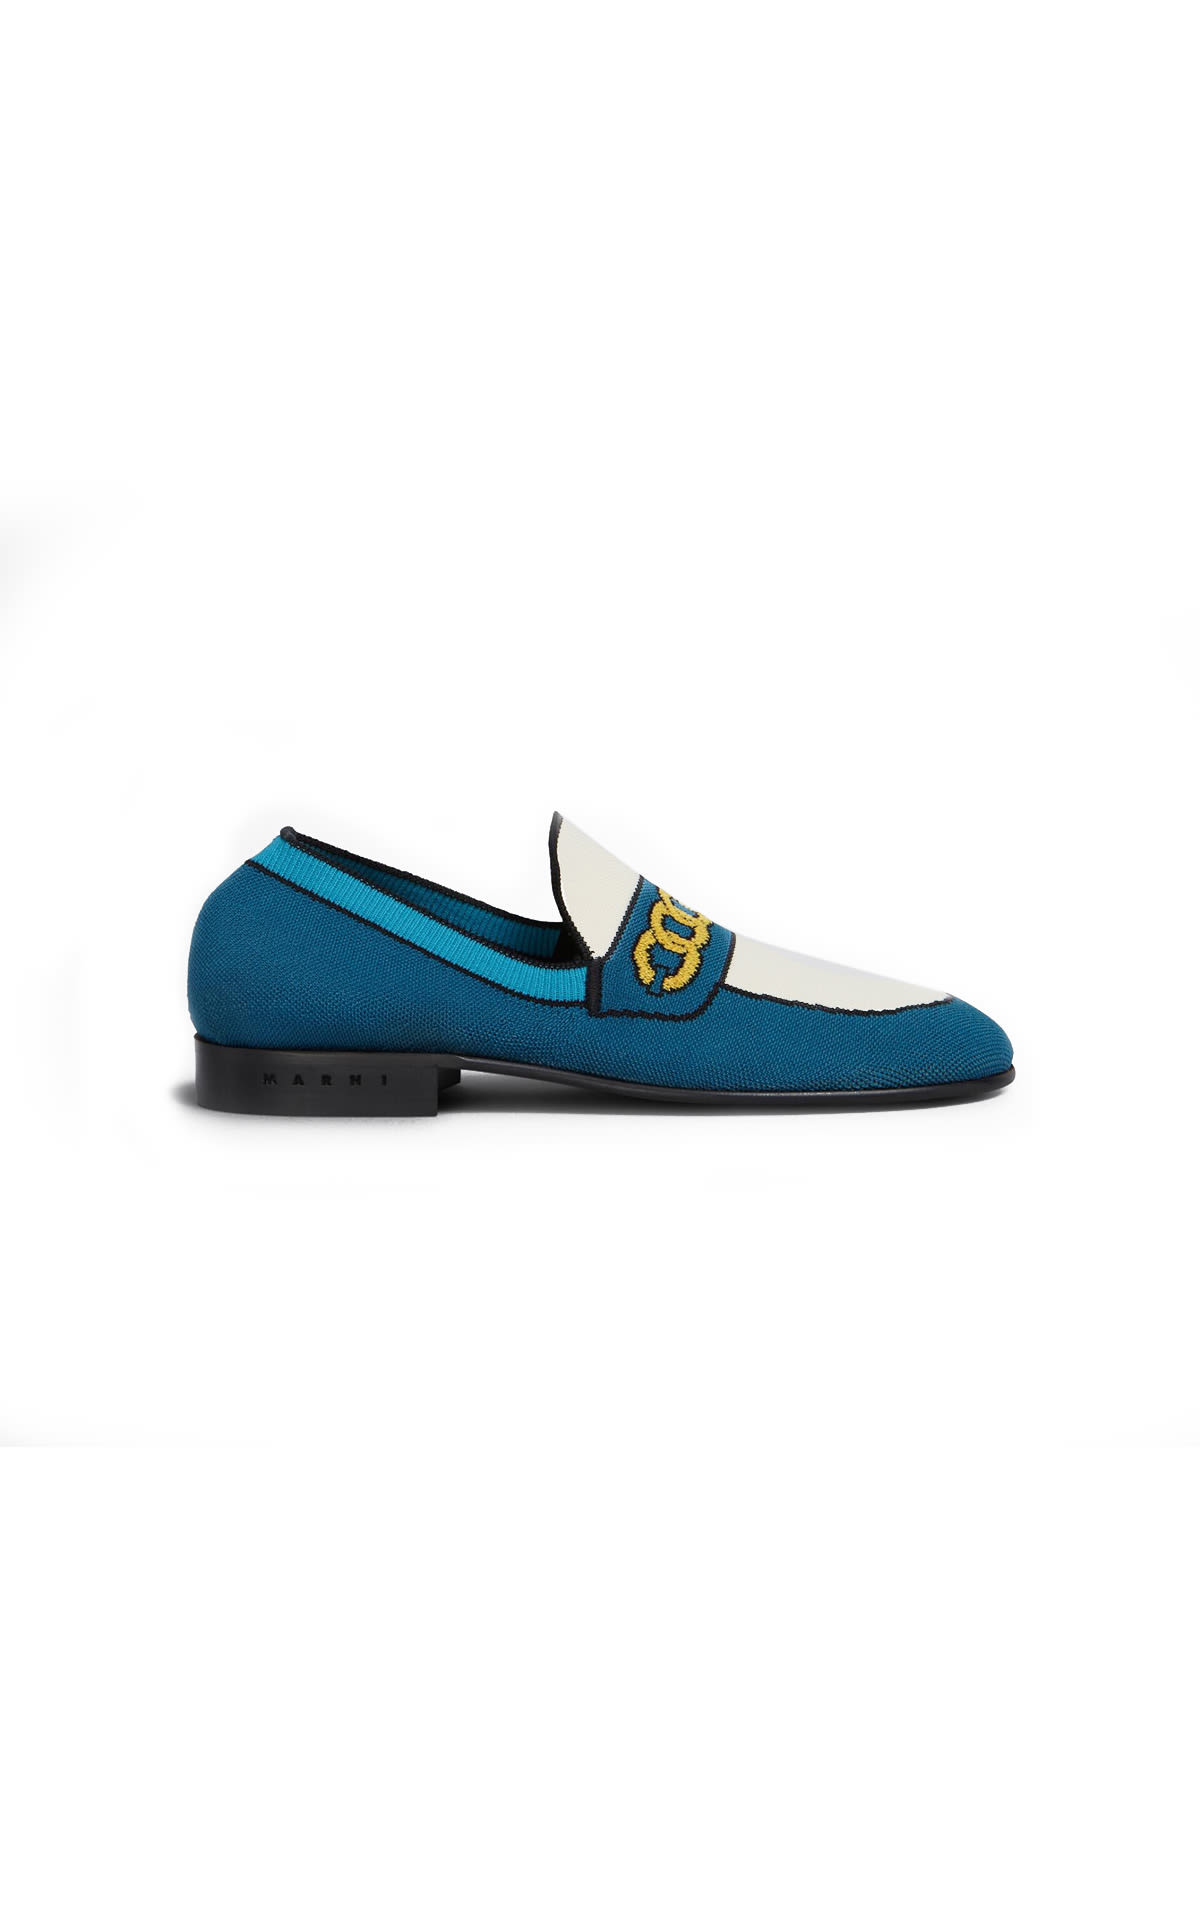 Marni Moccasins with contrasting graphic 